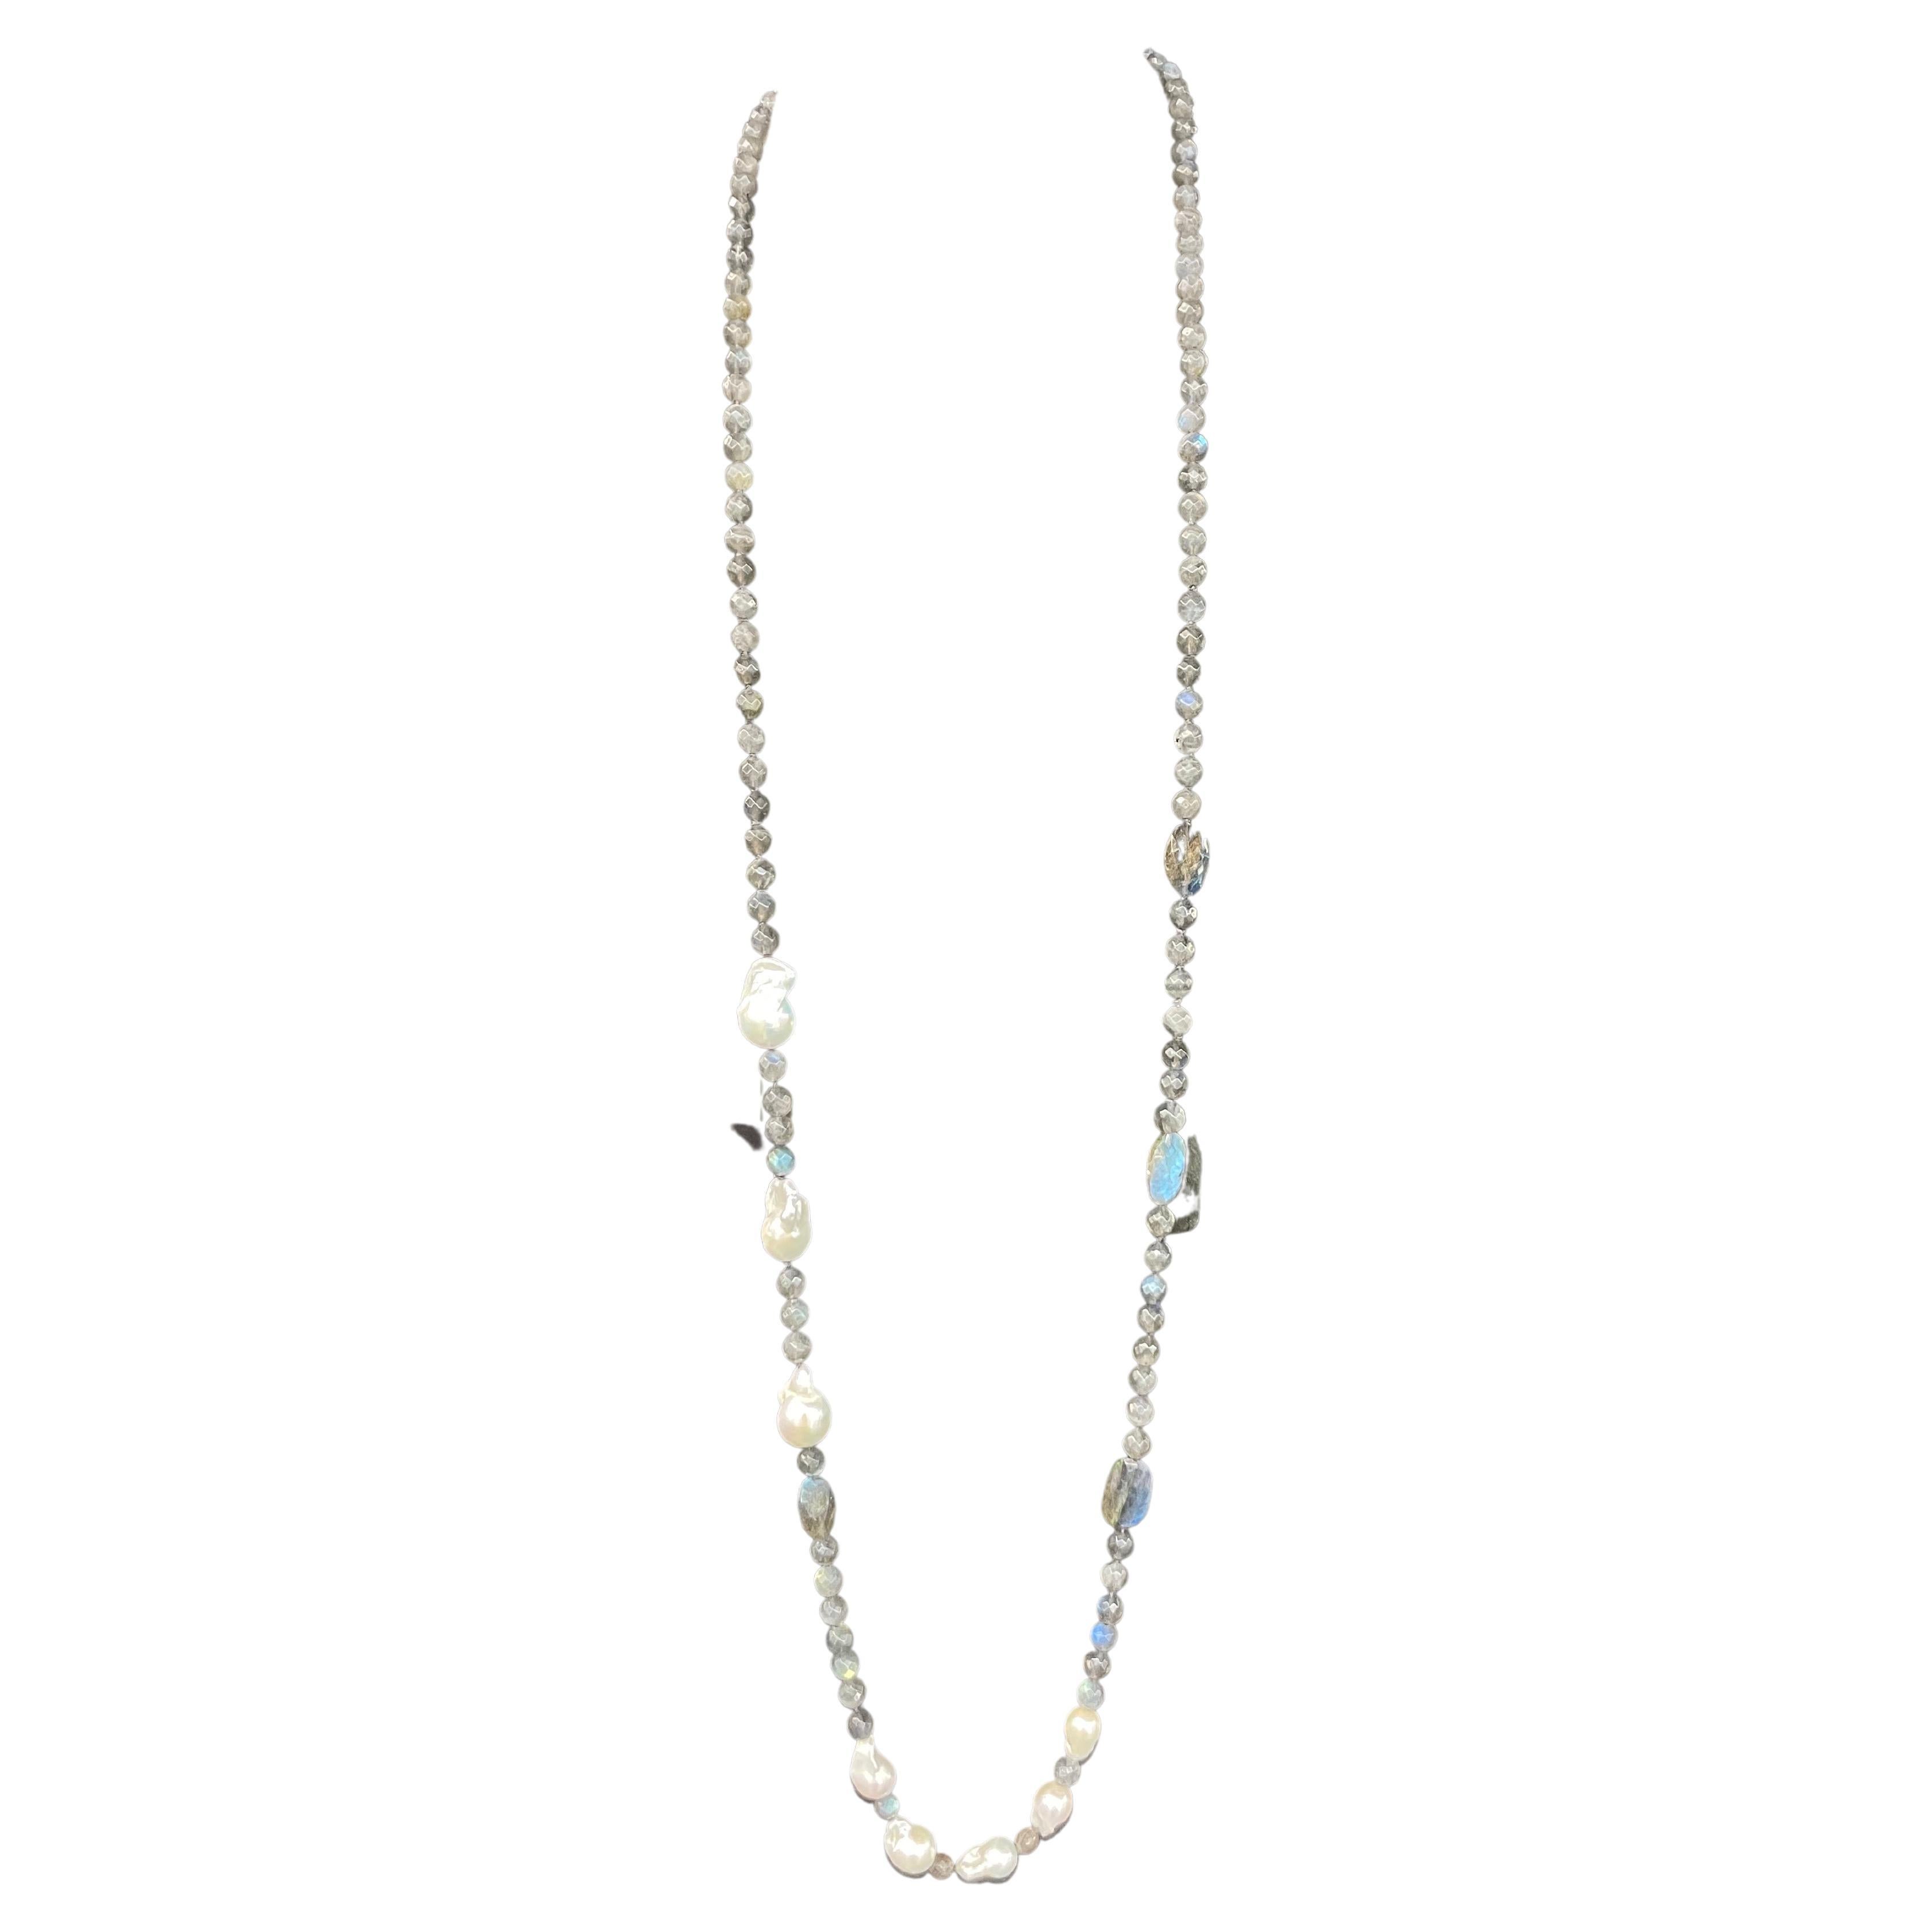 One strand of Labradorite nugget beads with accents of Baroque Pearls ranging from 14-23 MM, 44 Inches long. 
More strands in stock. 